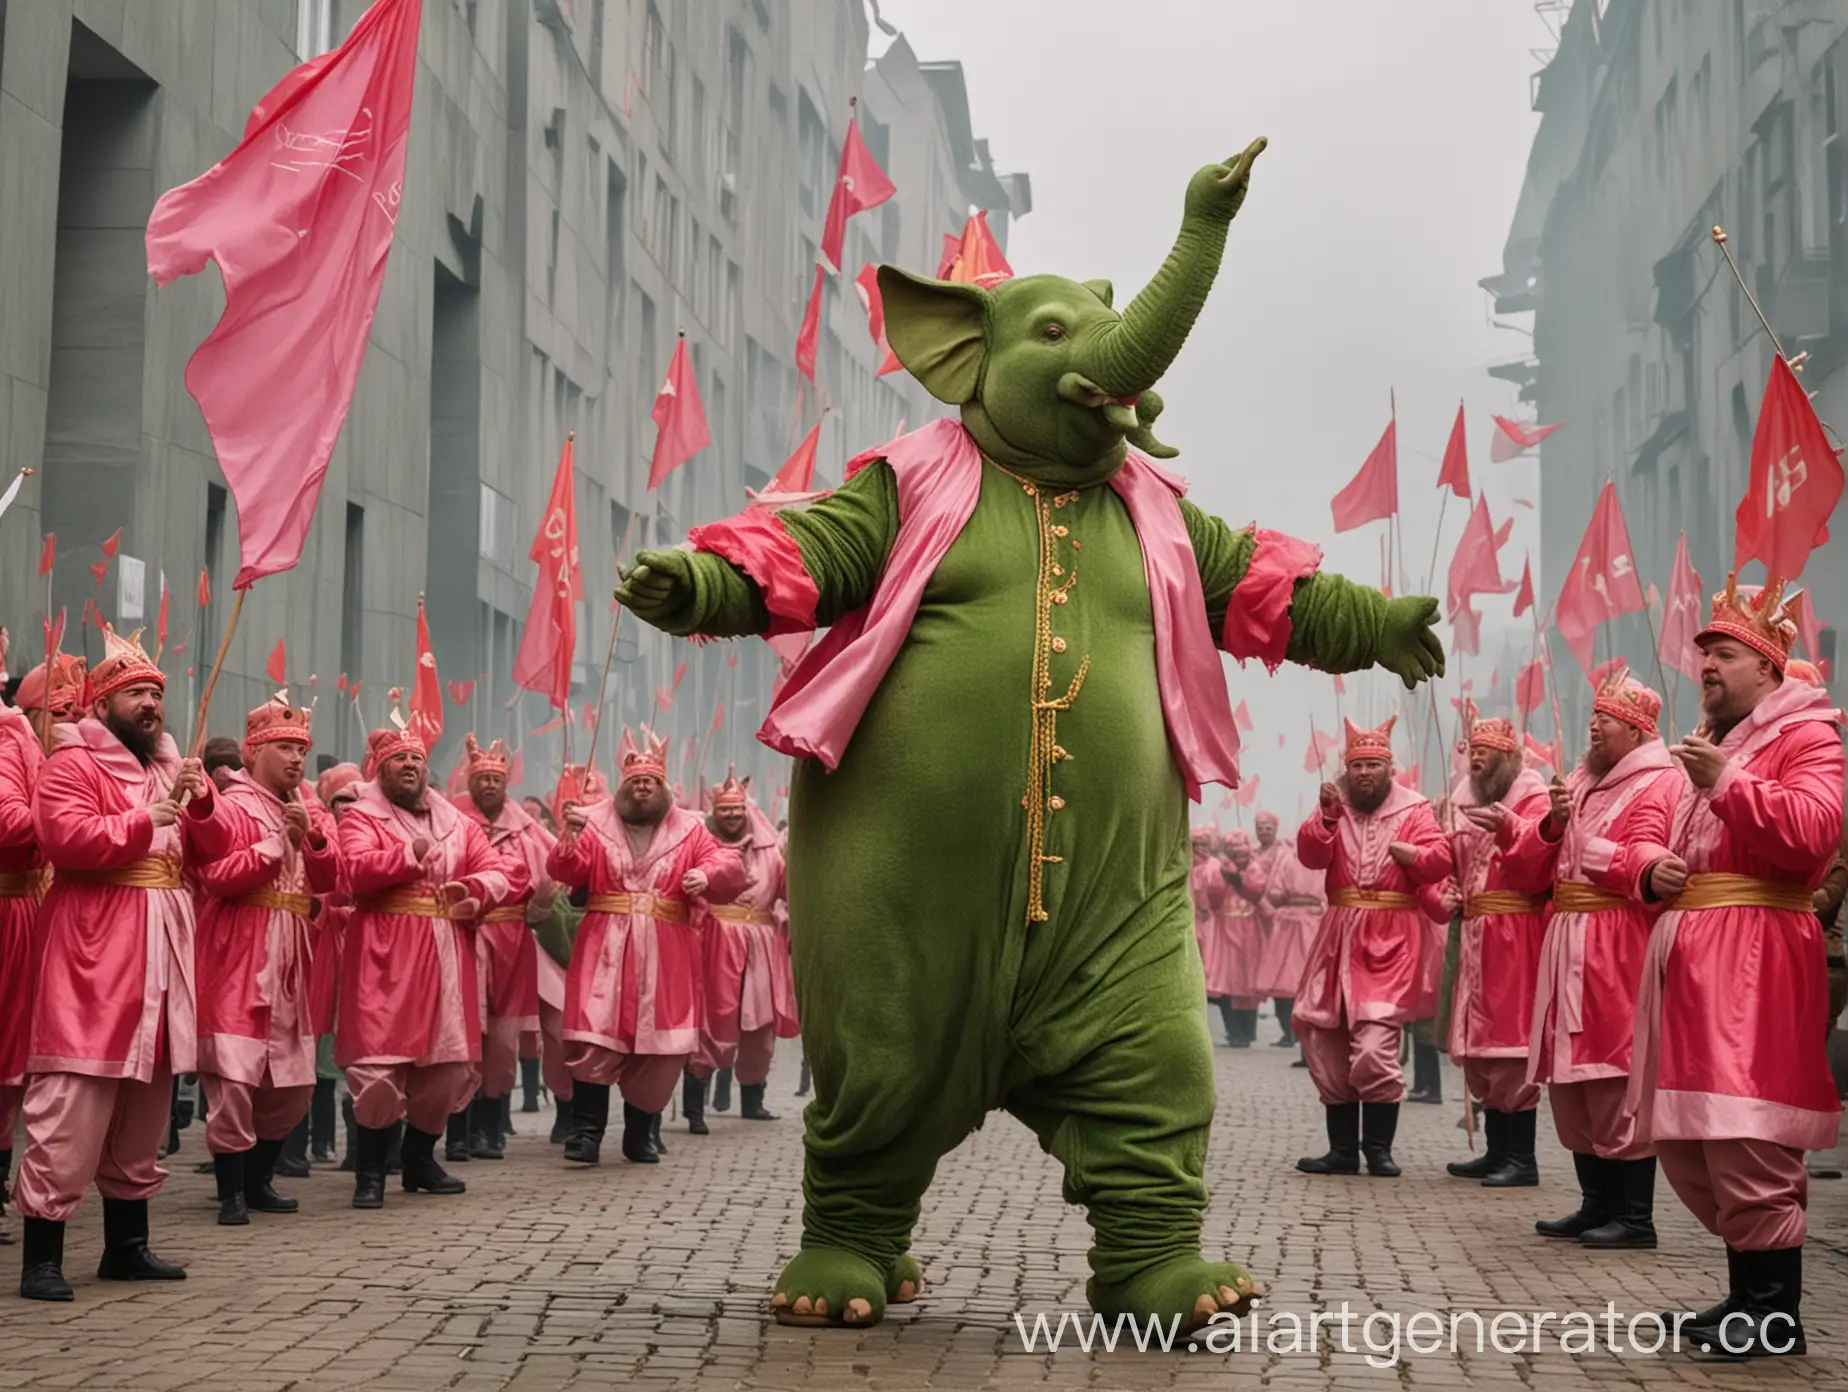 Festive-Dance-Bald-Man-in-Green-Elephant-Costume-with-Friends-in-Pink-Deer-Costumes-and-Lenin-Statue